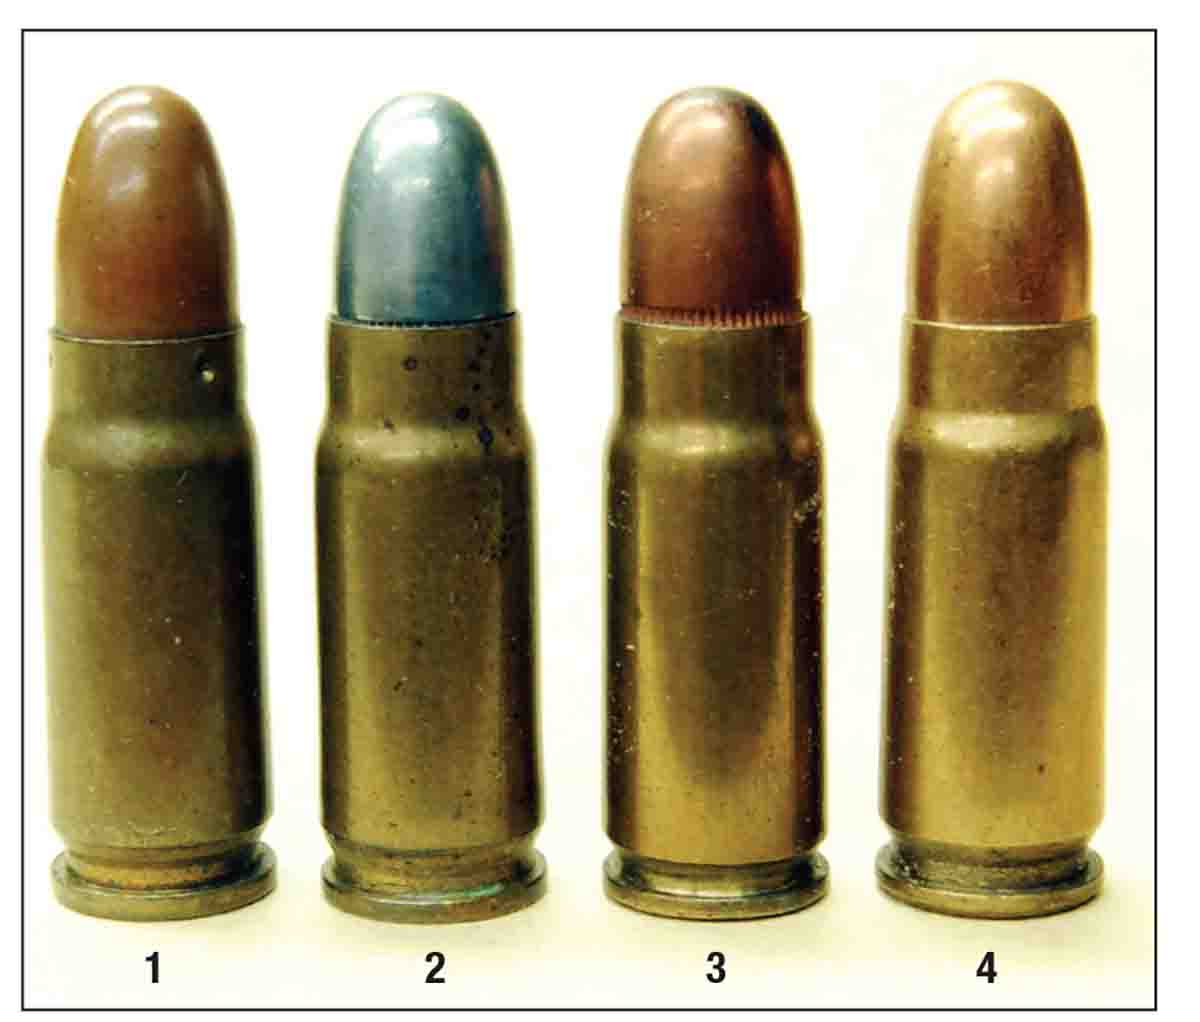 Ancestors of the 30 Luger are the: (1) 7.65mm Mannlicher, (2) 7.65mm Borchardt, (3) 7.63mm Mauser and (4) 7.62mm Tokarev. All are the same physical size, but loaded to different pressures.